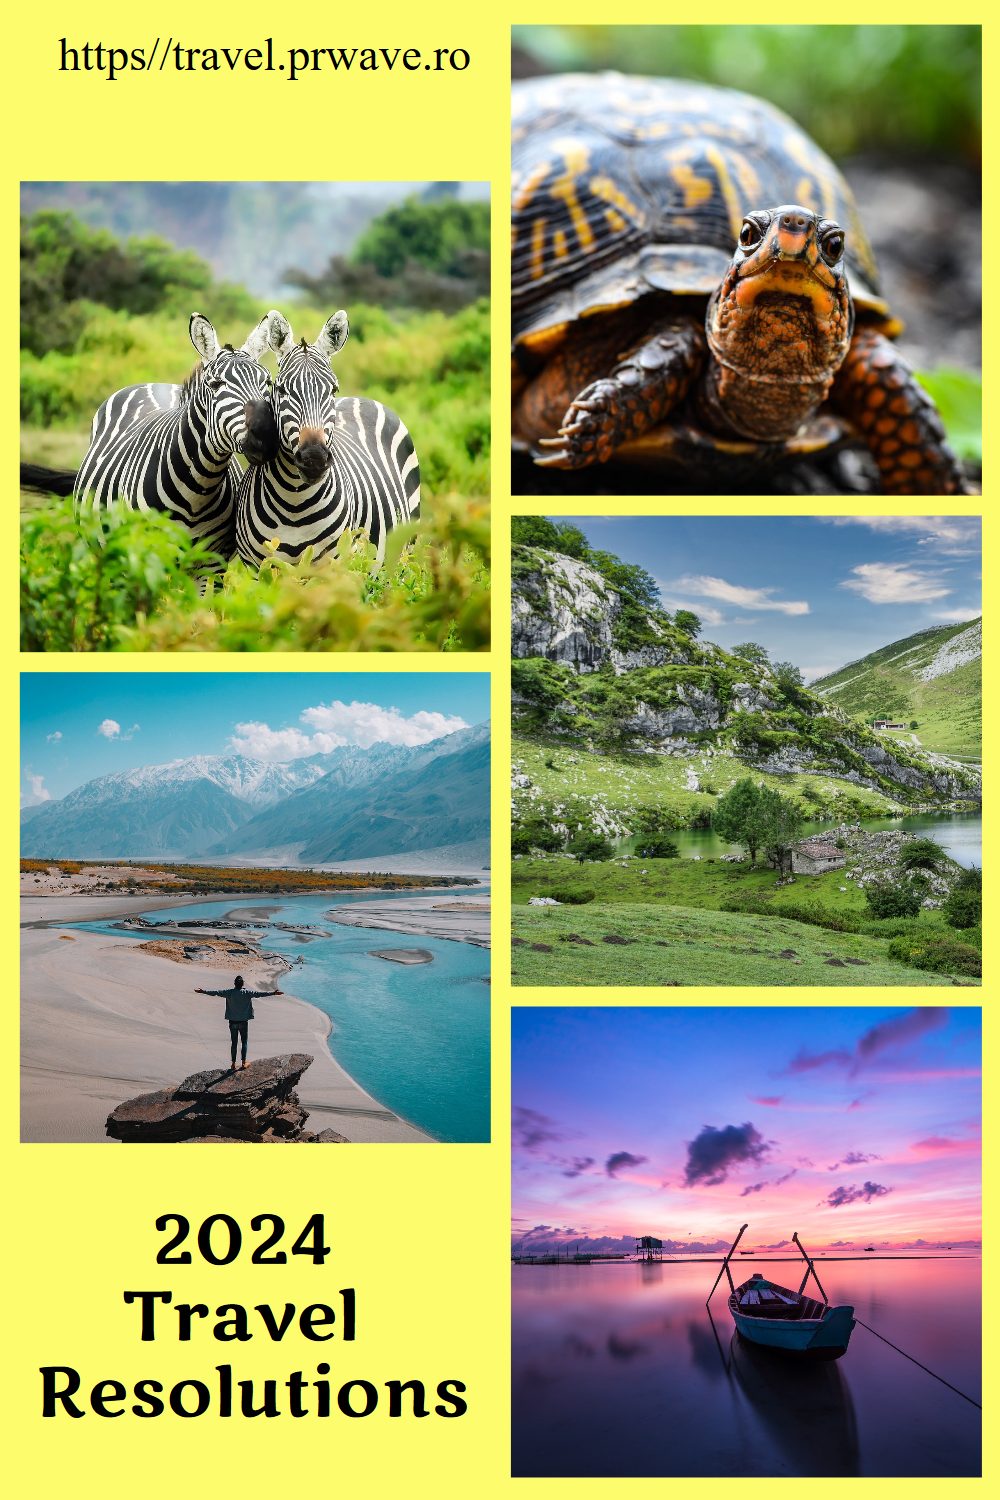 Travel resolutions for 2024. Discover many 2024 Travel Resolutions you can set and achieve easily! 2024 resolutions perfect for you!  #travelresolutions #2024resolutions #2024goals #happynewyear #travelresolutions #newyearresolutions #travelgoals #newyeartravelgoals